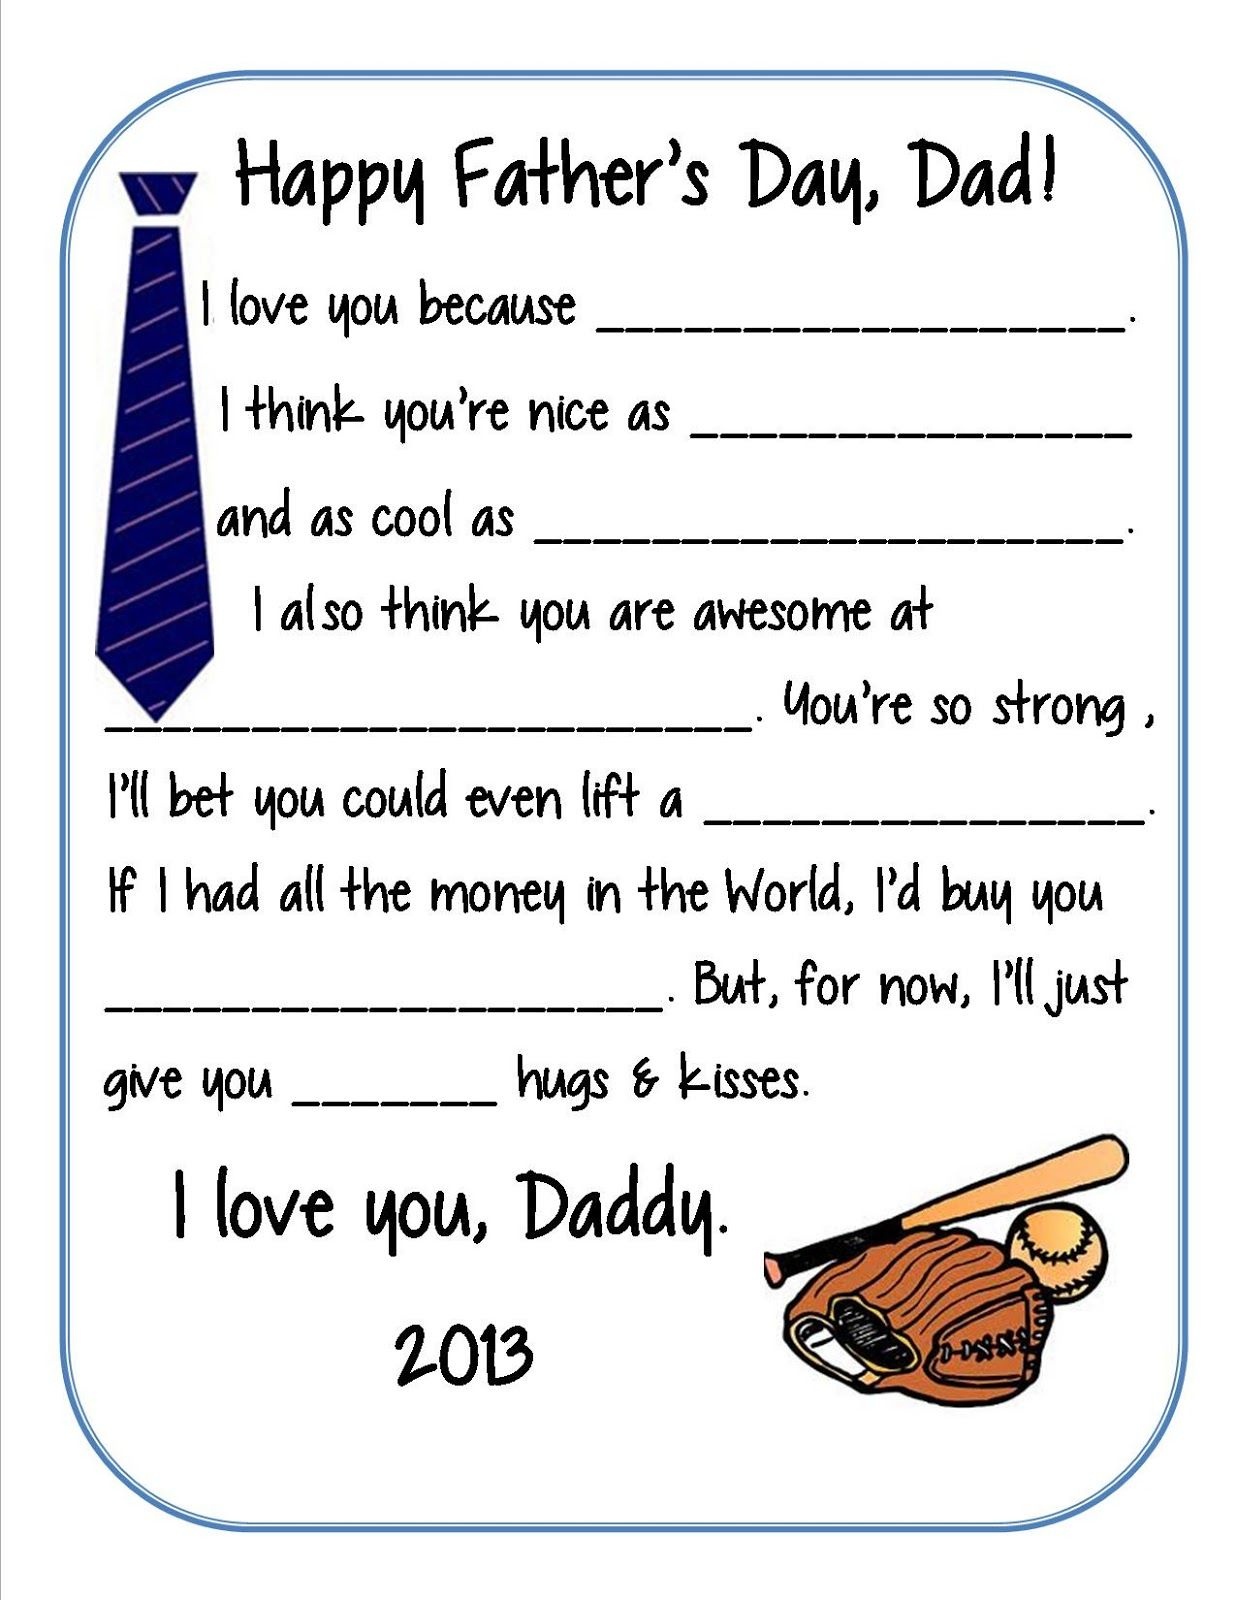 6 Easy Diy Father's Day Gift Ideas | I ❤ Dad Crafts | Father's Day - Free Printable Fathers Day Cards For Preschoolers